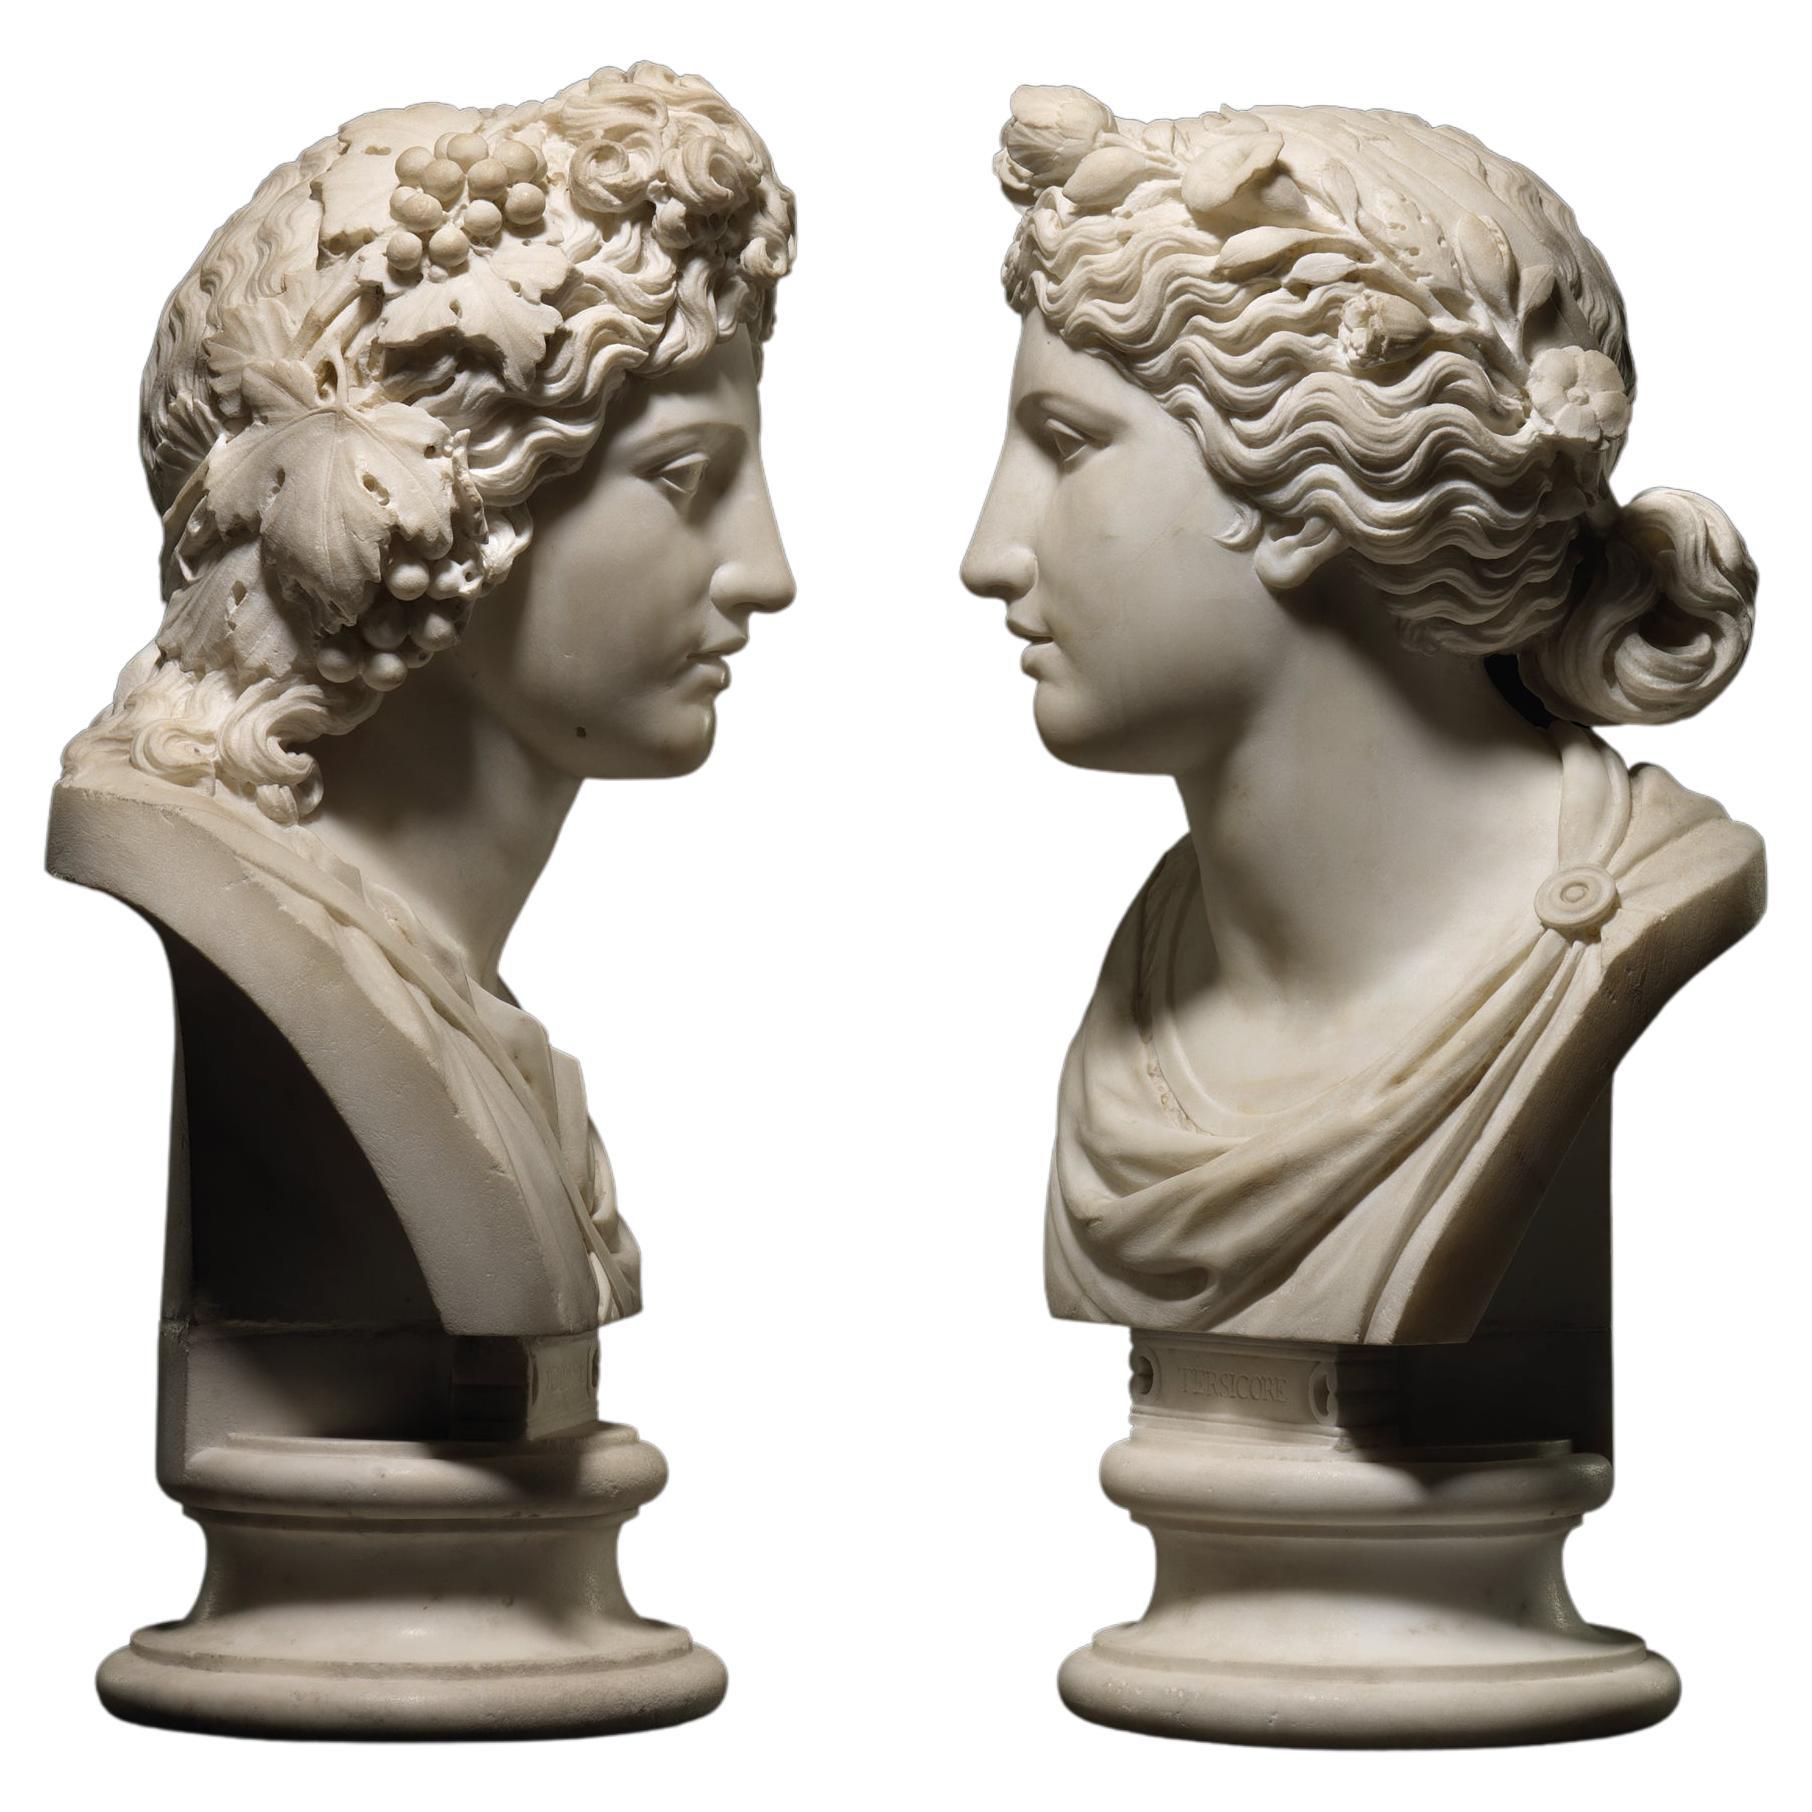 Item: a pair of marble busts of terpsichore and melpomene circle.
Author: carlo albacini.
Origin: rome, italy.
Period: late 18th century

Dimensions:
19 3/8 and 19 ¼ in. (49.3 and 48.7 cm.) high, overall

Both busts have a votive index